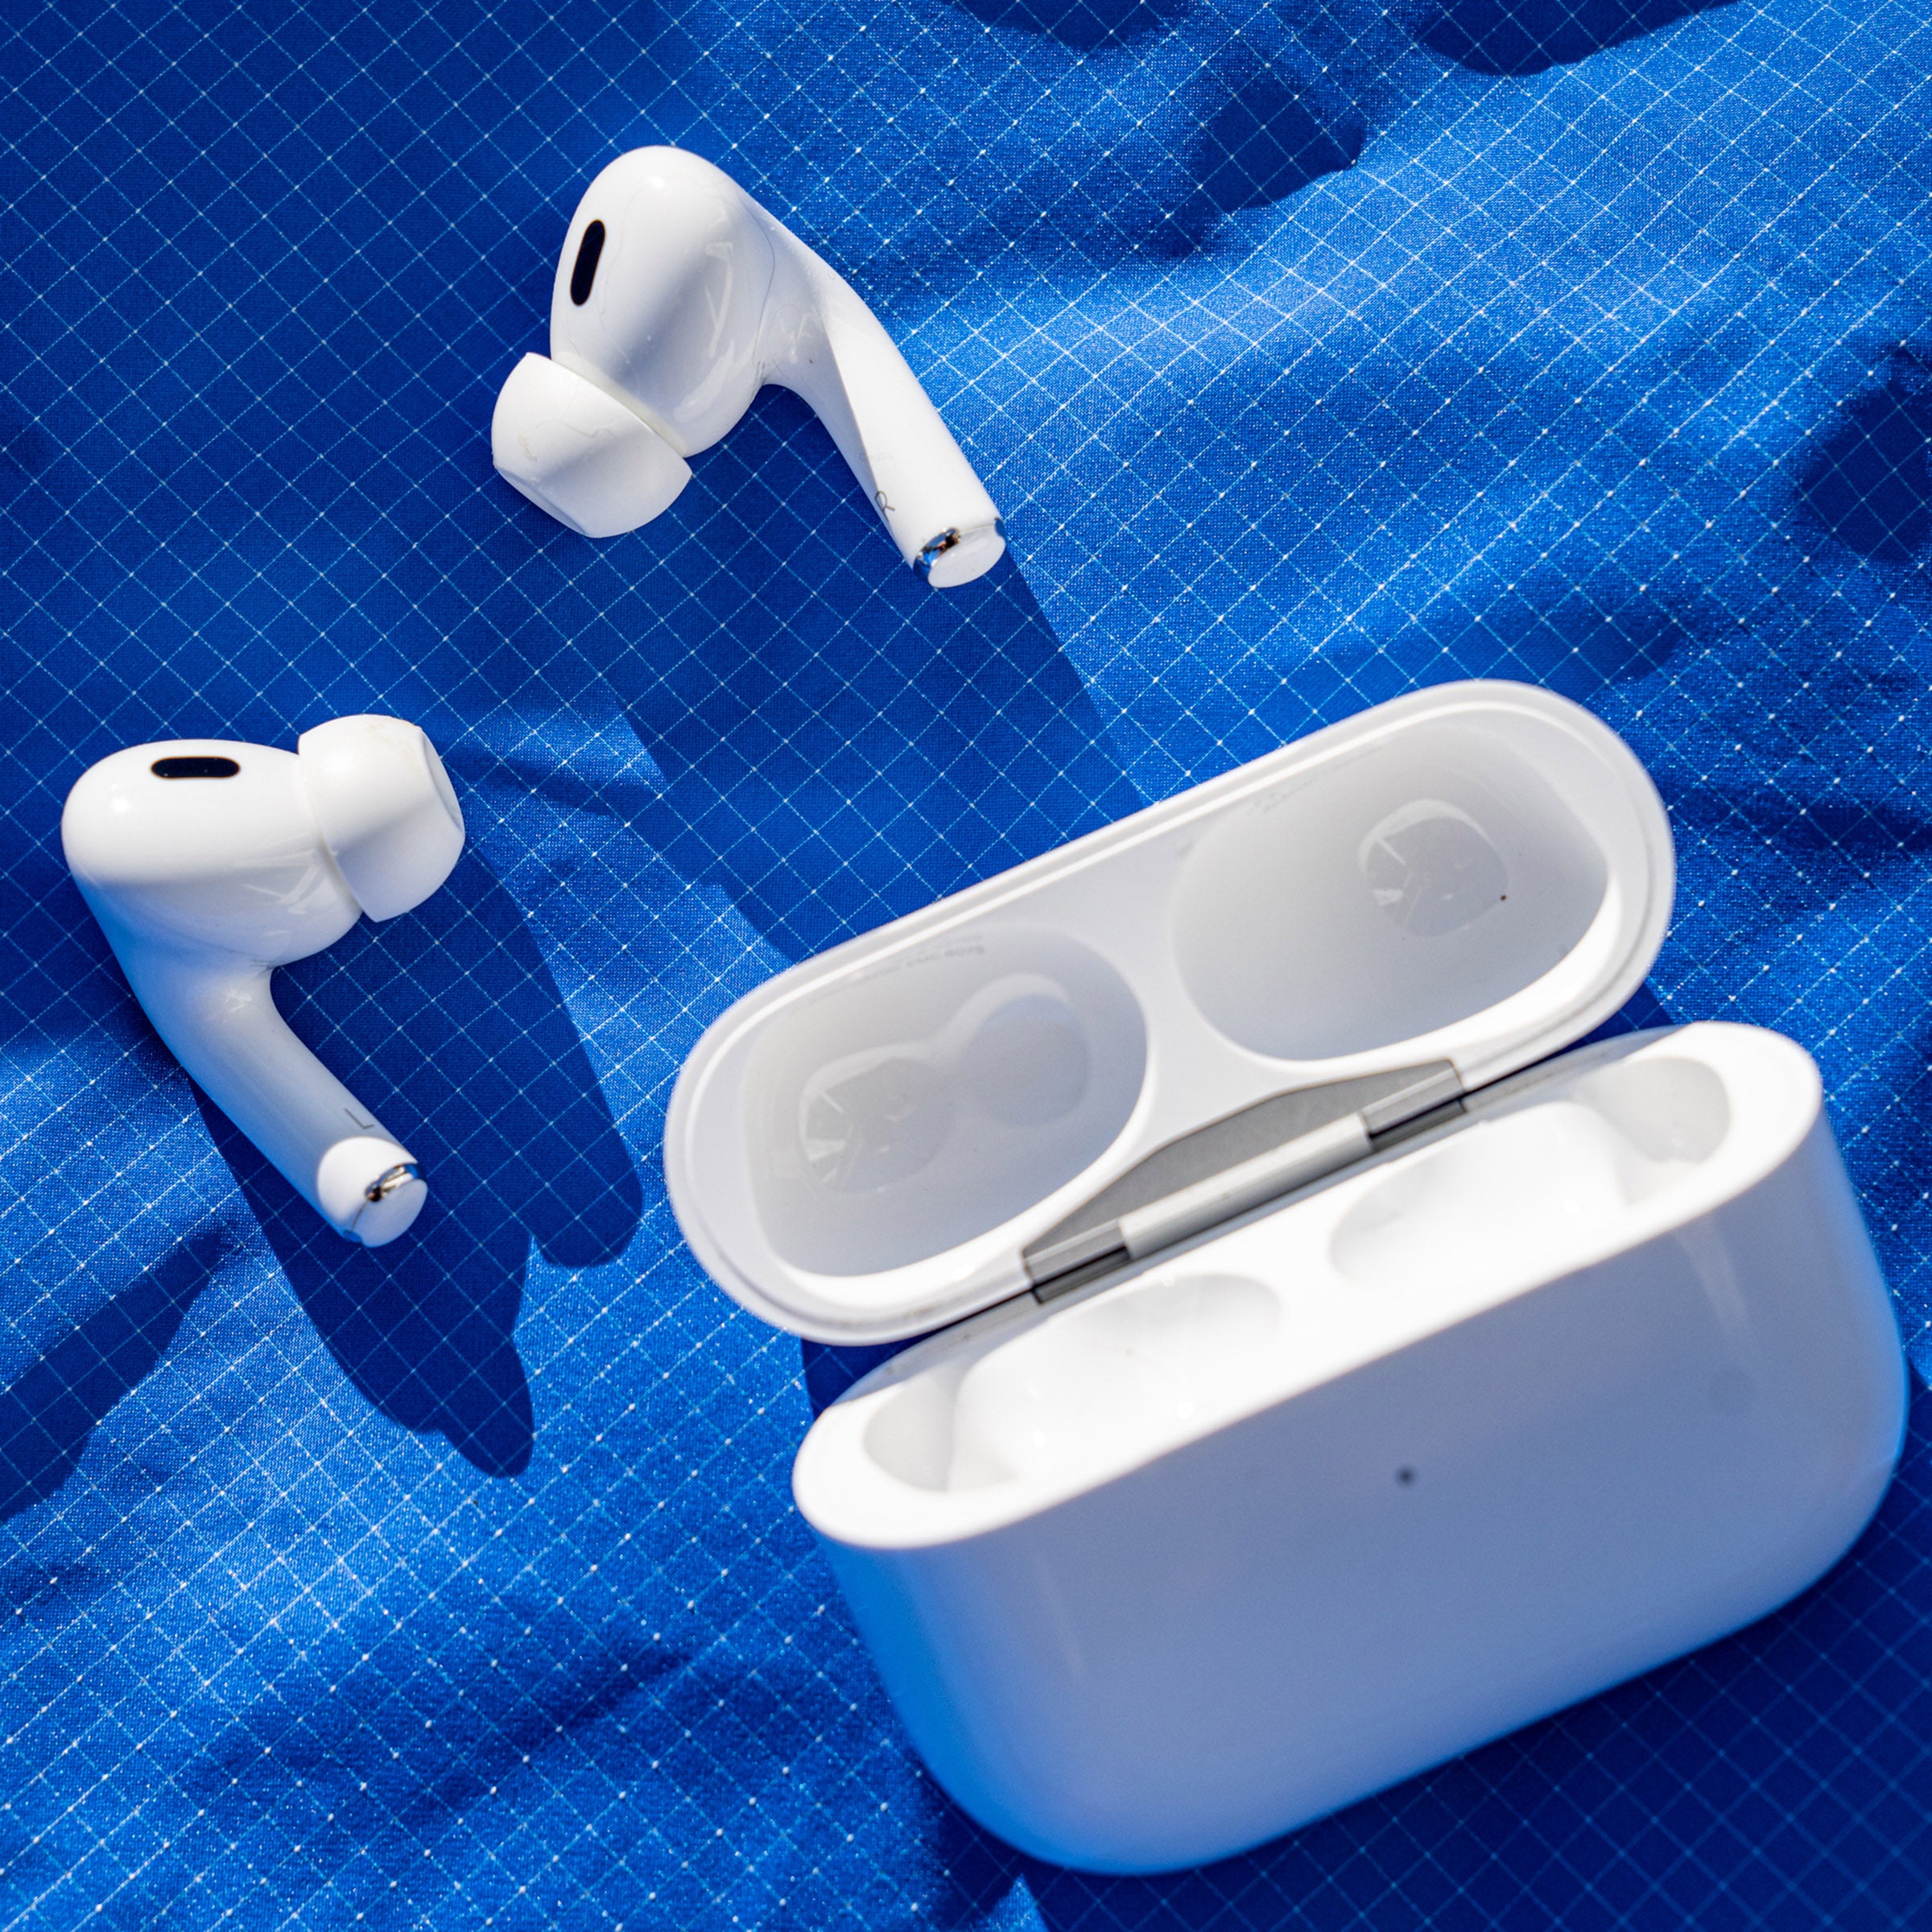 Apple AirPods Pro 2 Review: The Only Headphones You Need - Outside